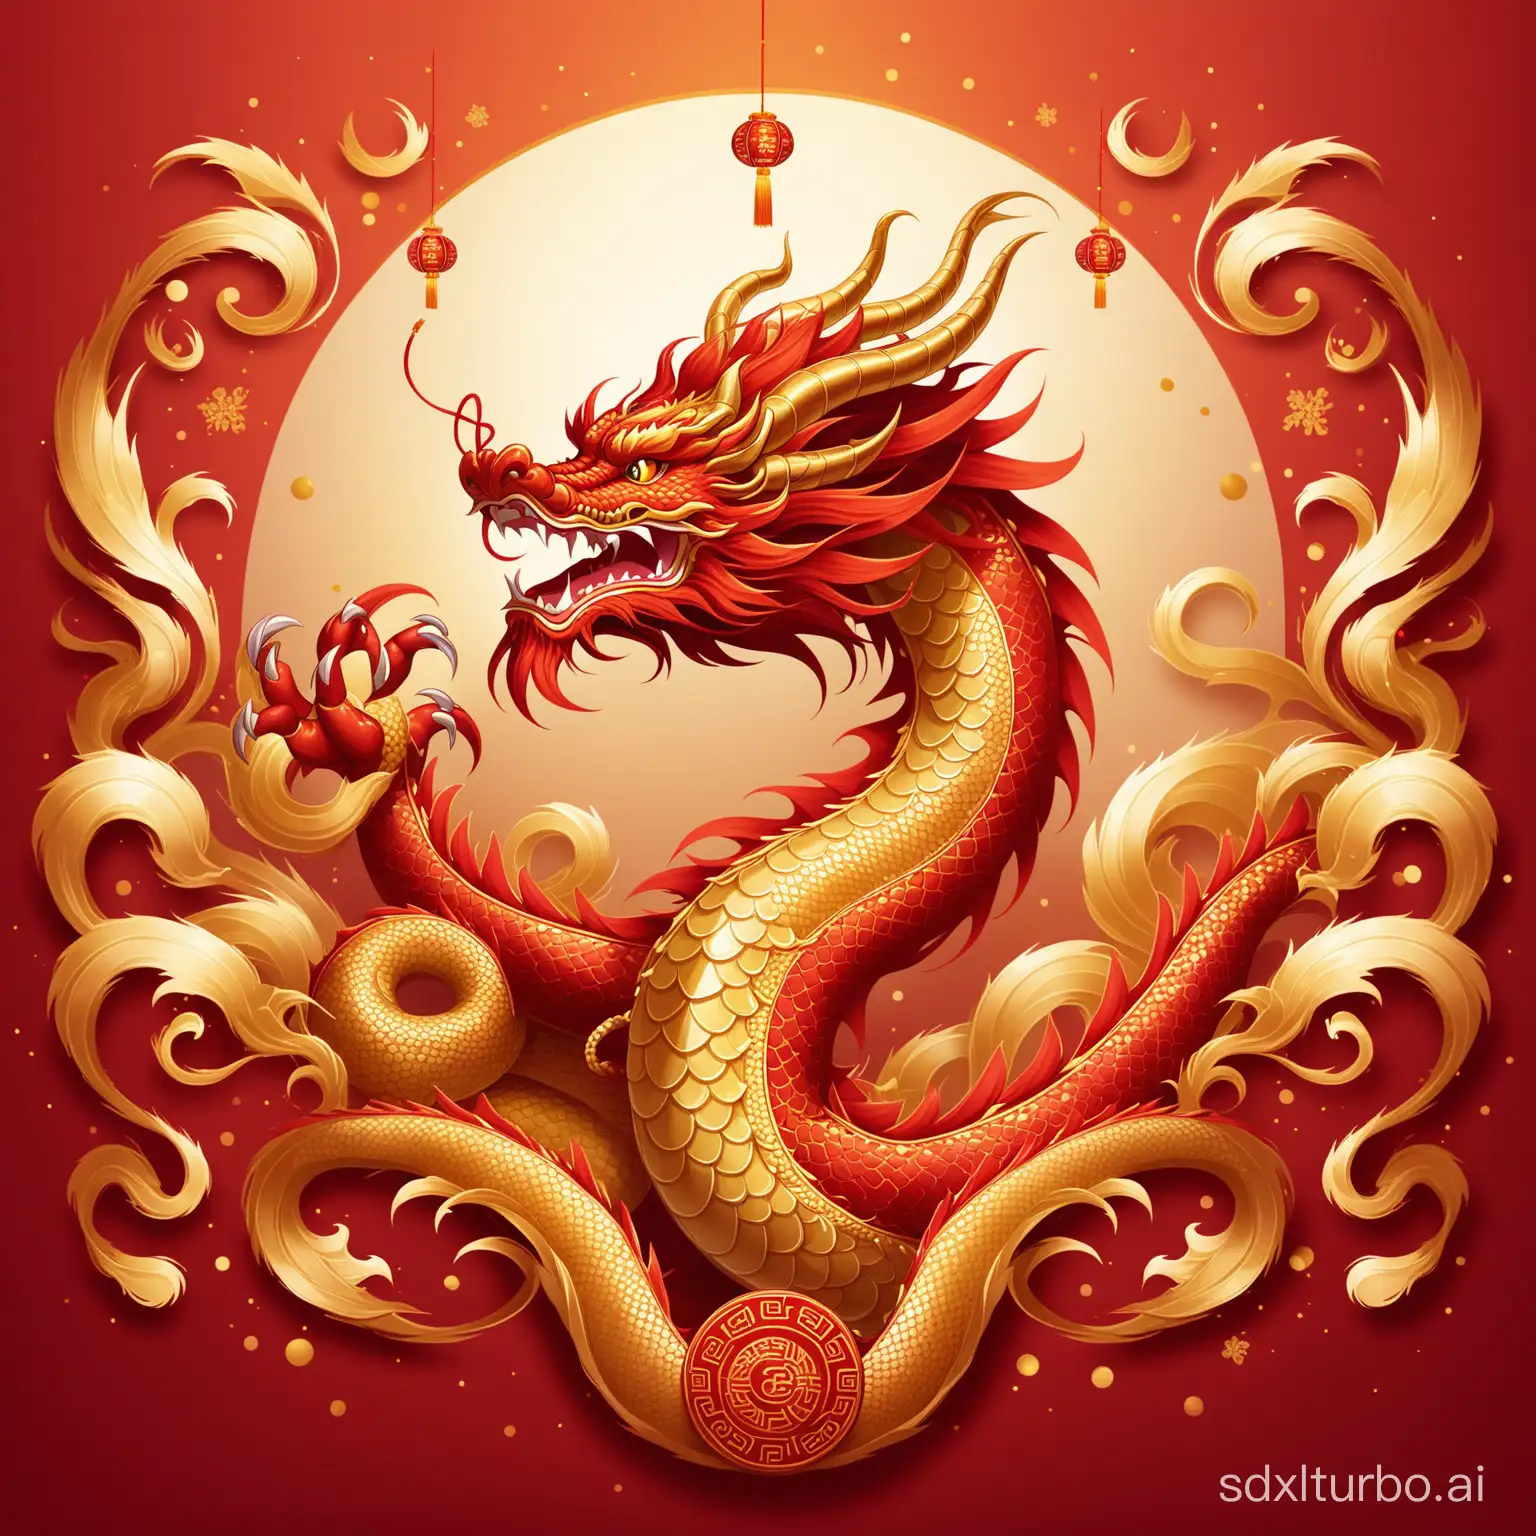 Chinese dragon, red background, traditional elements decoration, wide composition, bright and soft lighting, rich details, friendly gaze, dragon's claws forming a V shape, festive colors, joyful atmosphere